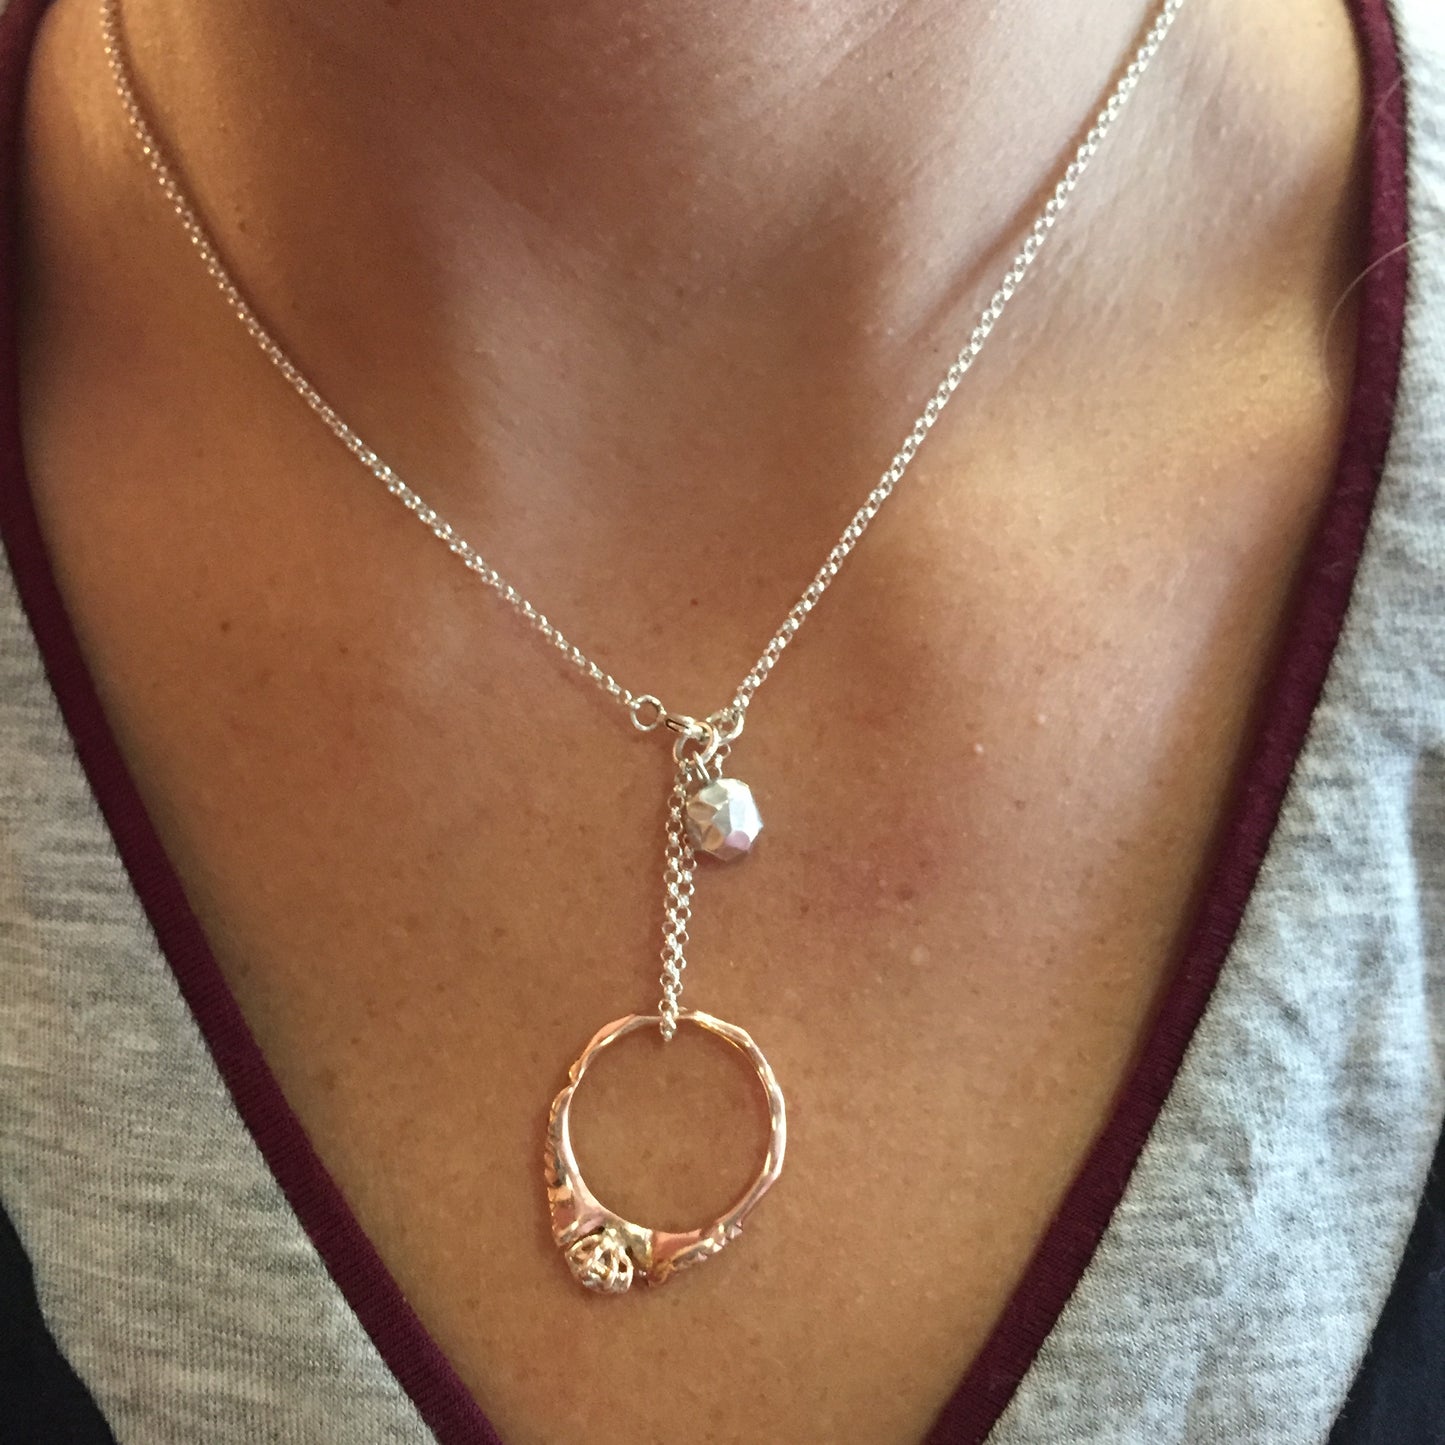 Ring Keeper Necklace- Sunspot